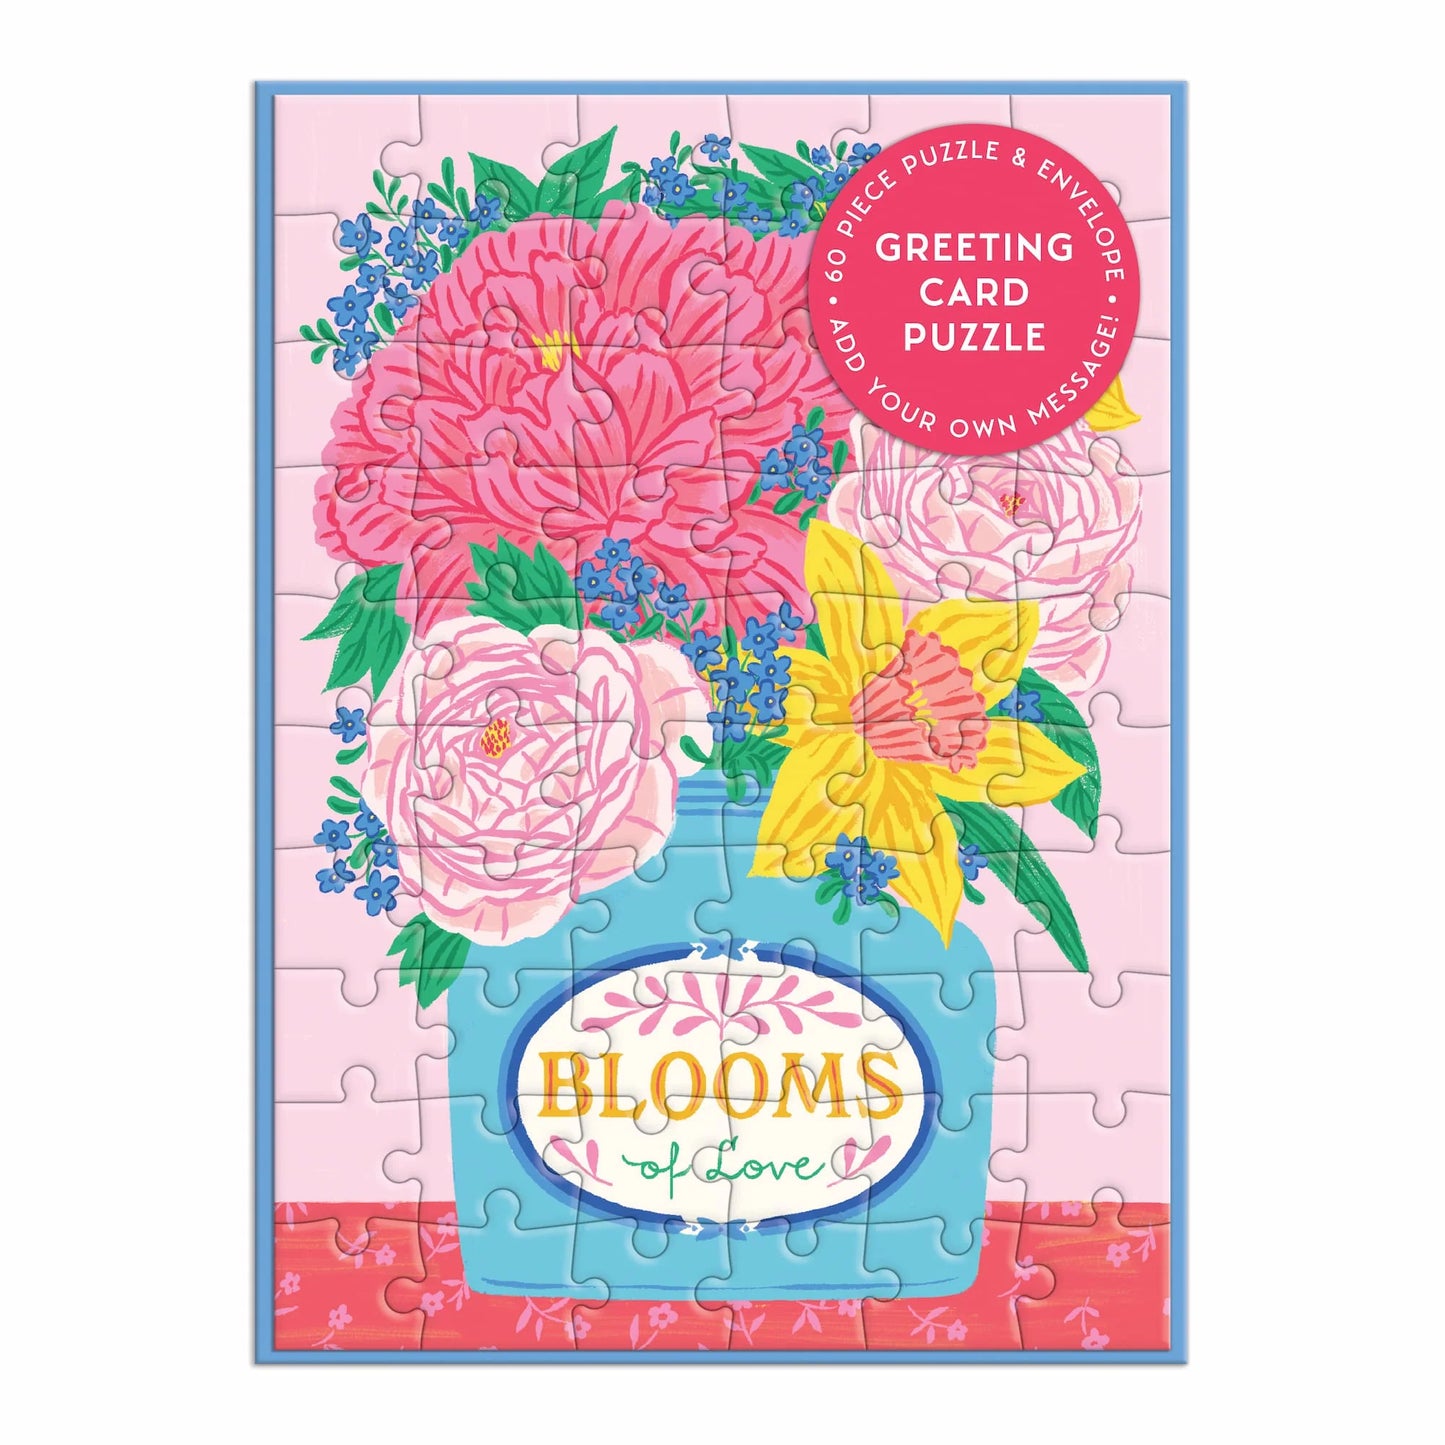 Greeting Card Puzzle - Blooms of Love